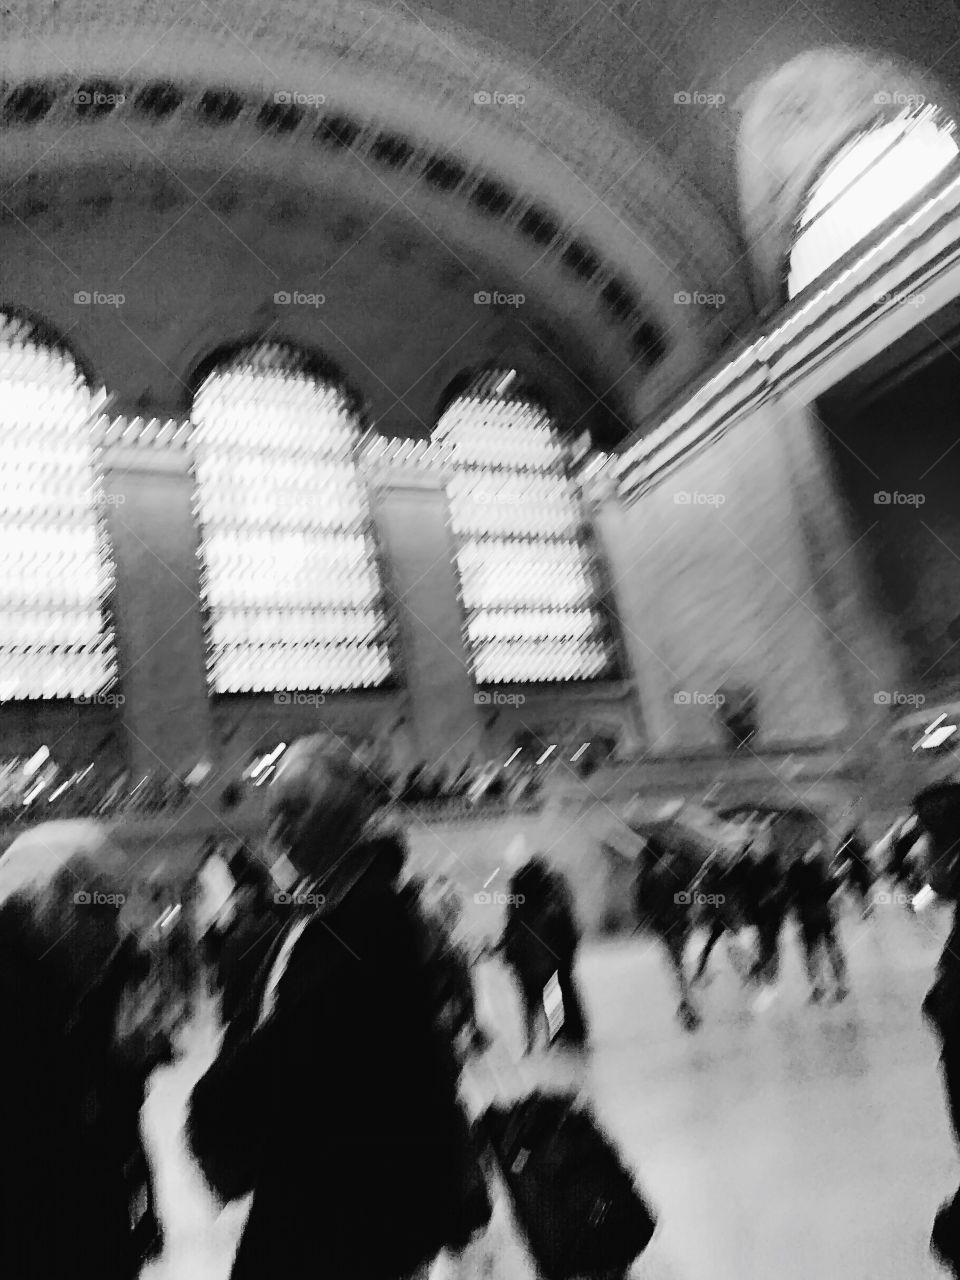 New York City Grand Central Station is filled with travelers. All racing against the clock to arrive on time.